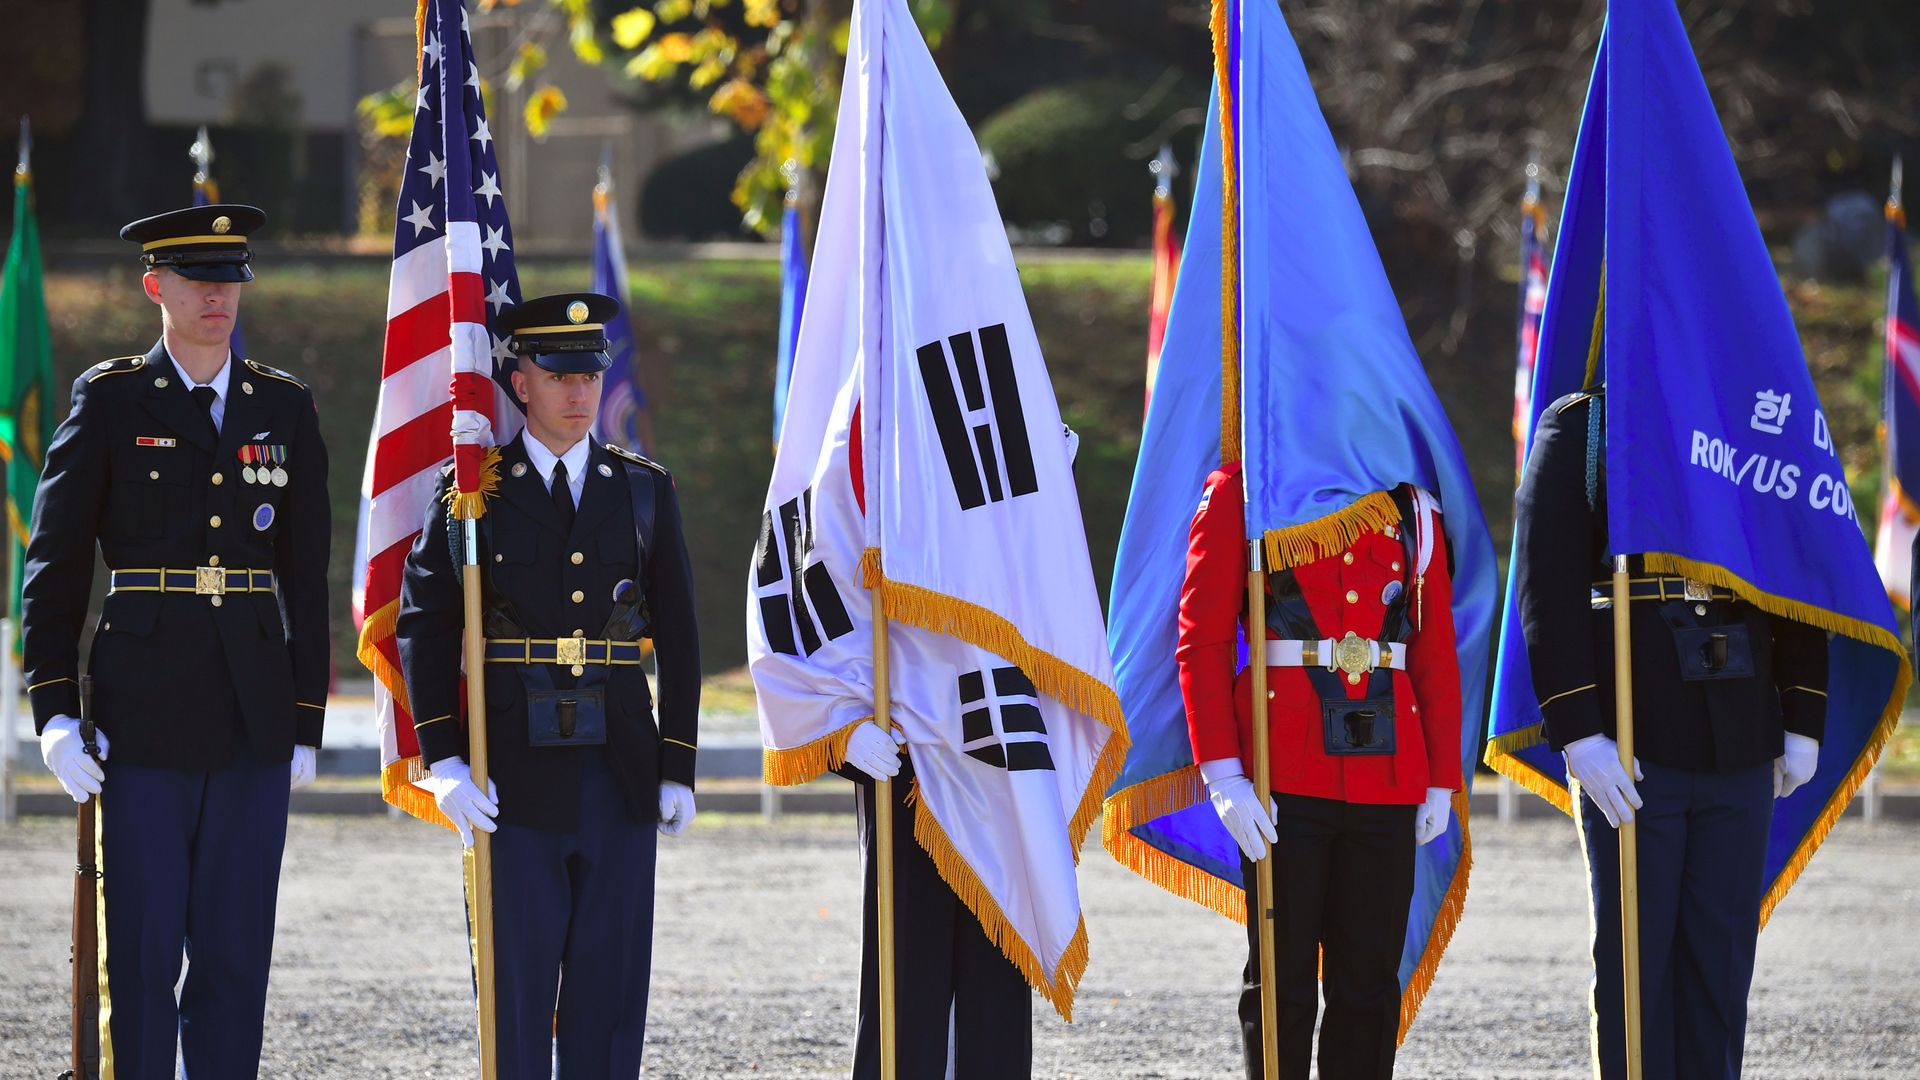  United Nations Command honour guards hold flags during a repatriation ceremony for the remains of an unidentified Korean War UN forces soldier at a US Army base in Seoul on November 20, 2018.